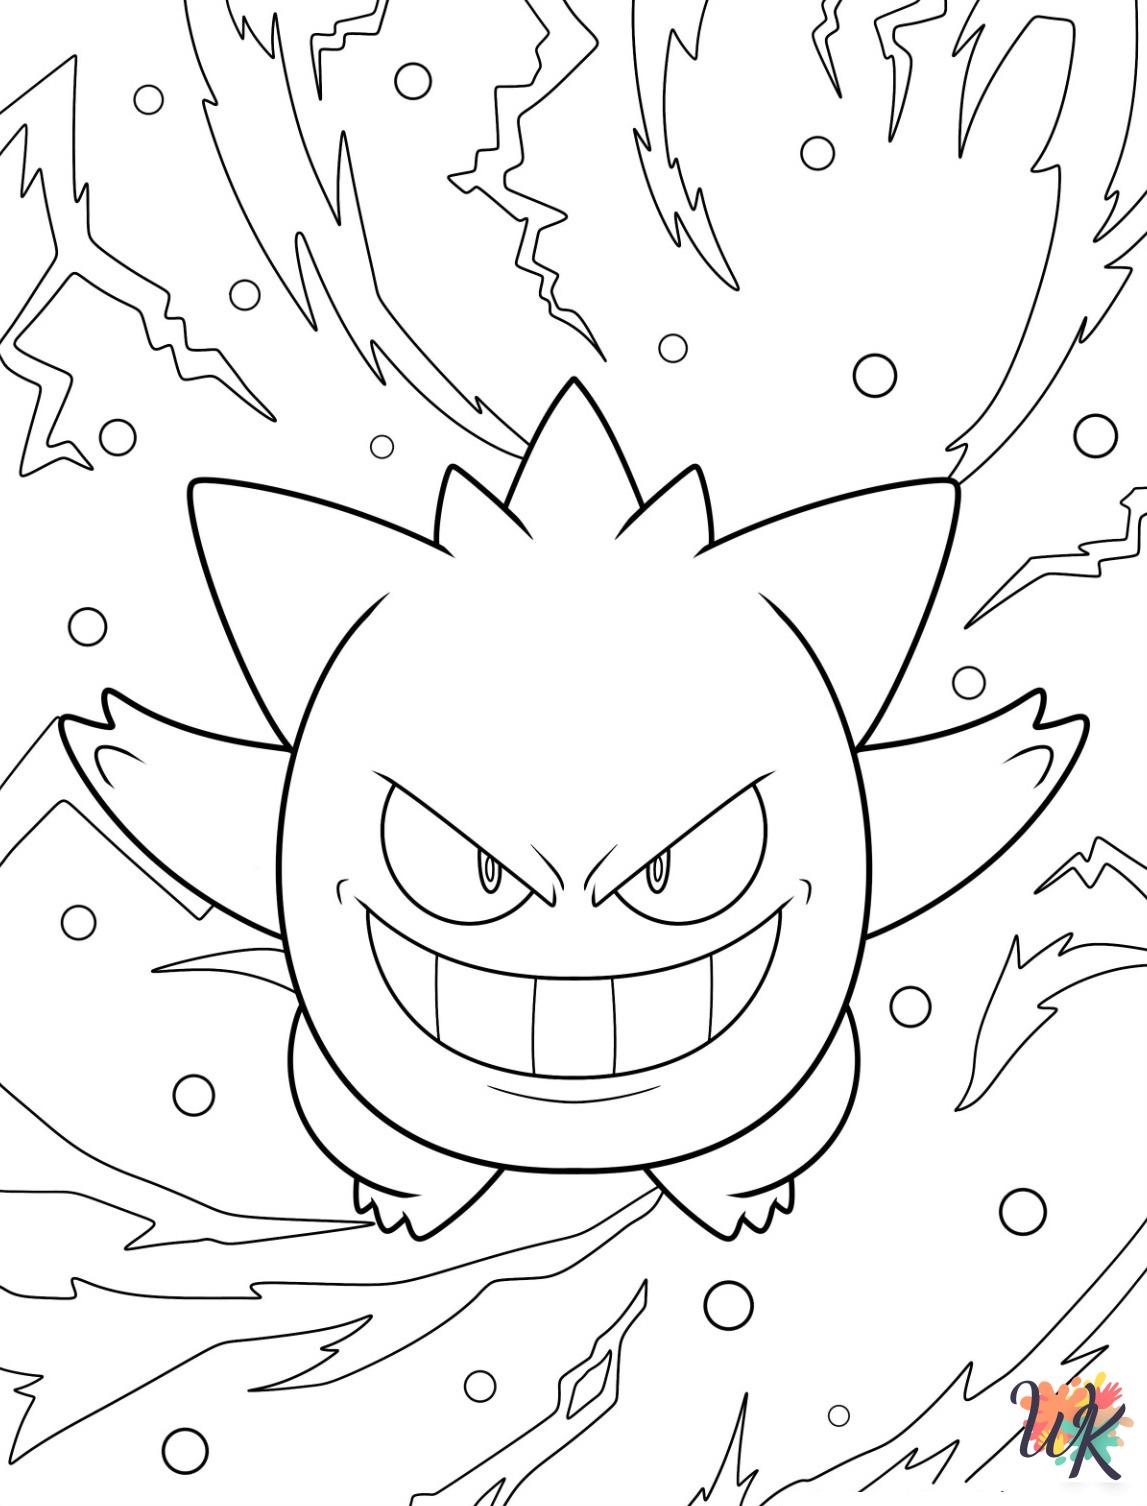 Gengar themed coloring pages